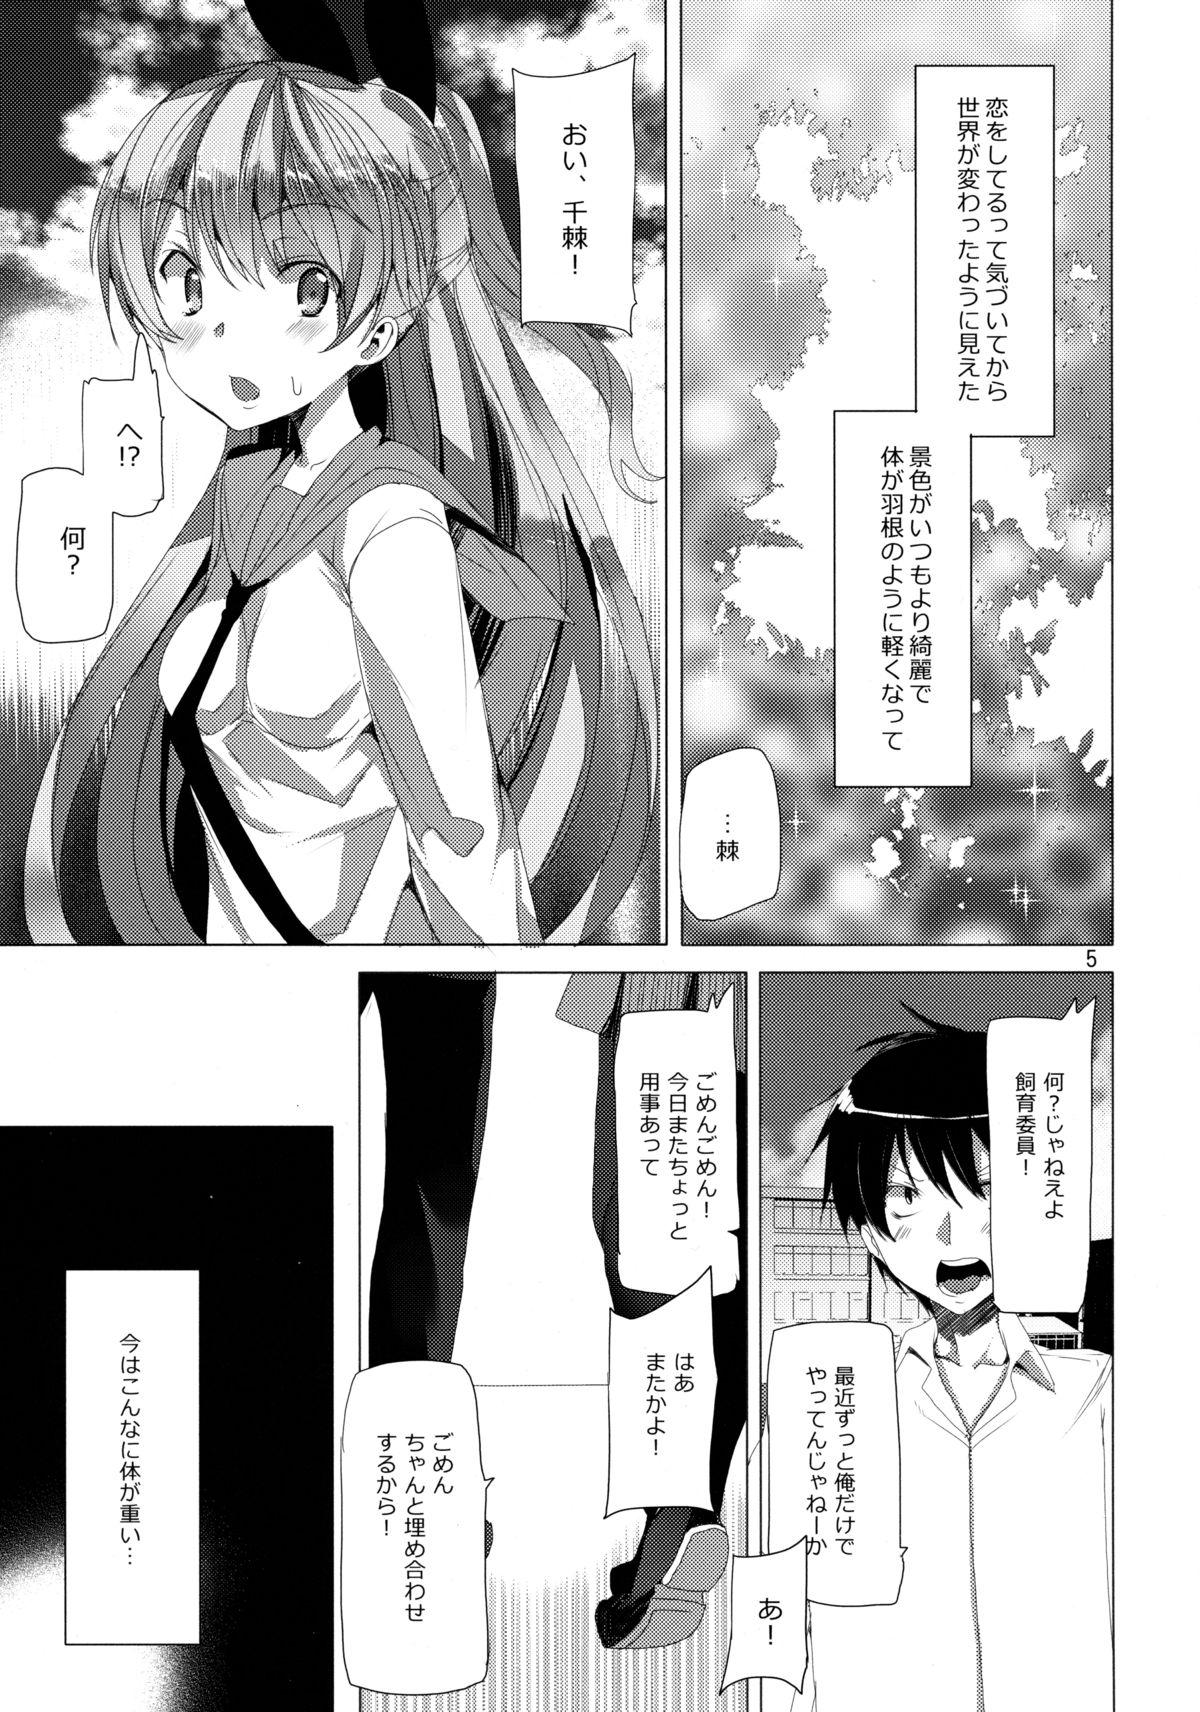 Funny Fake Lovers - Nisekoi Creampies - Page 4